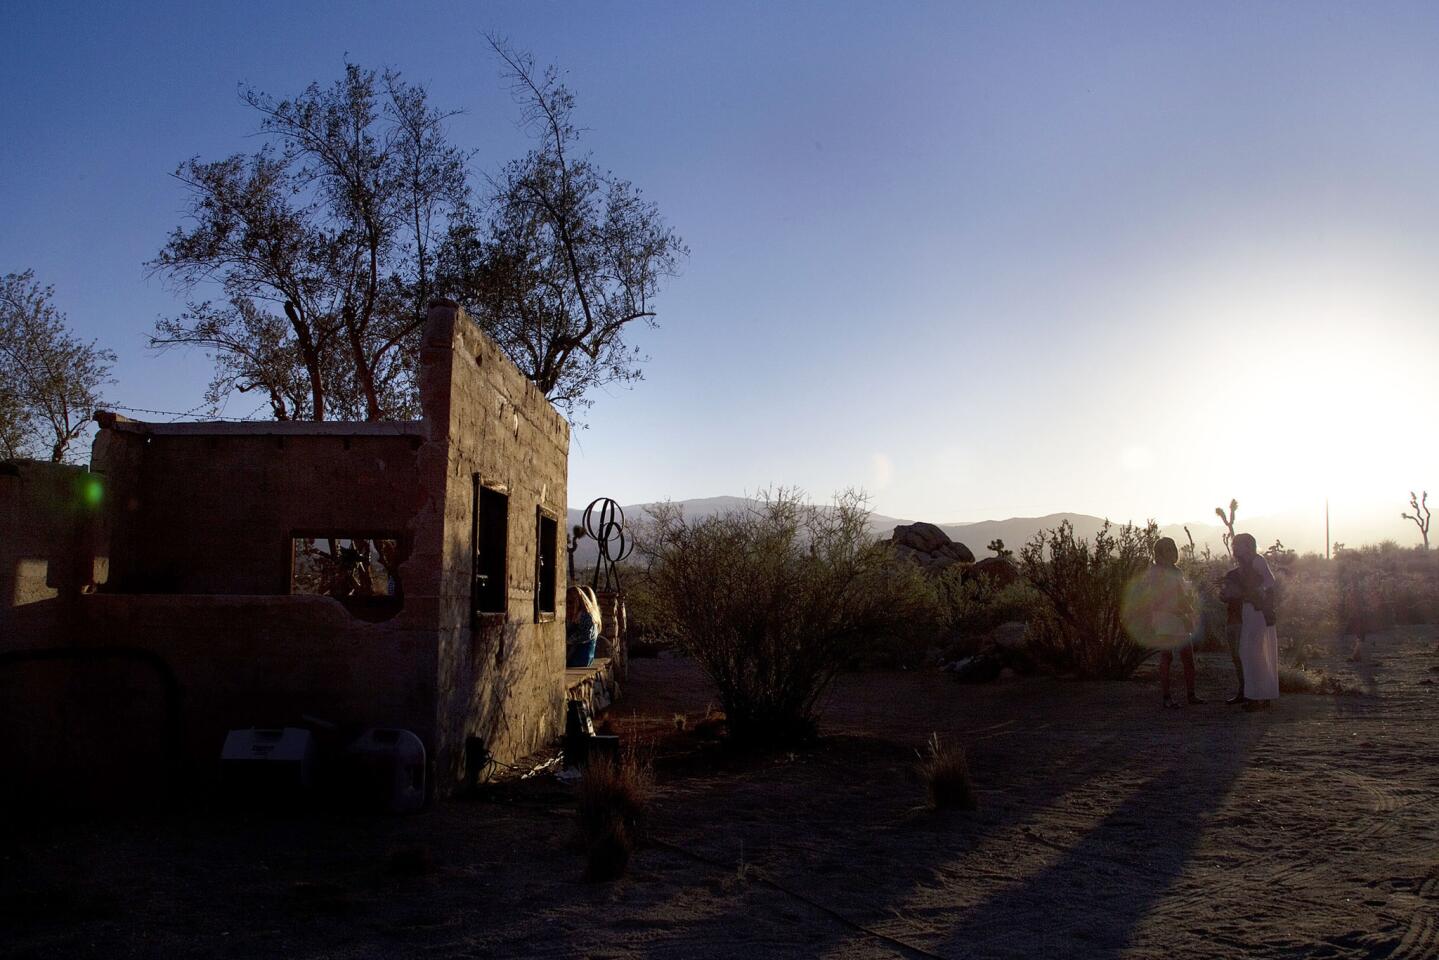 Dusk sets on ruins of a stone house transformed into an enchanting party spot in the Pipes Canyon area of Pioneertown, near Joshua Tree National Park. Owners Paul Goff and Tony Angelotti call it the Ruin, their place for potlucks under the stars.